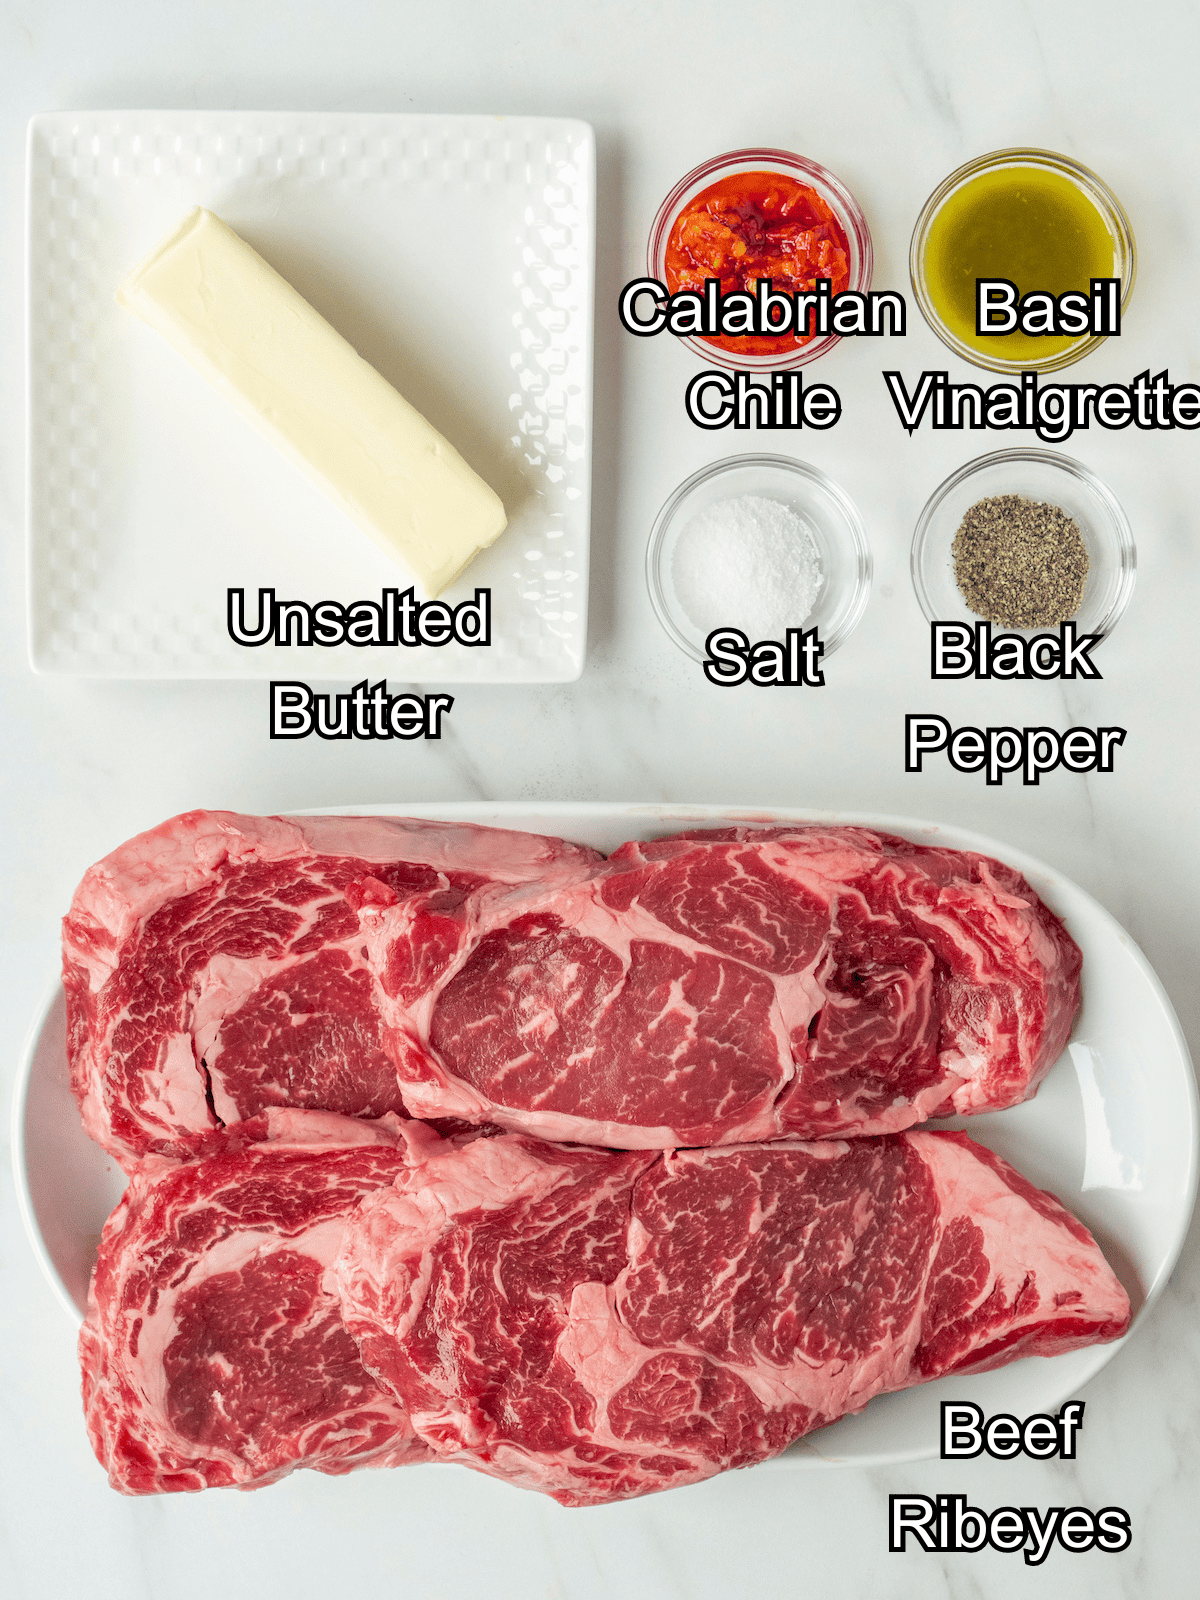 Mise-en-place with all the ingredients required to make grilled ribeyes with calabrian chile butter.